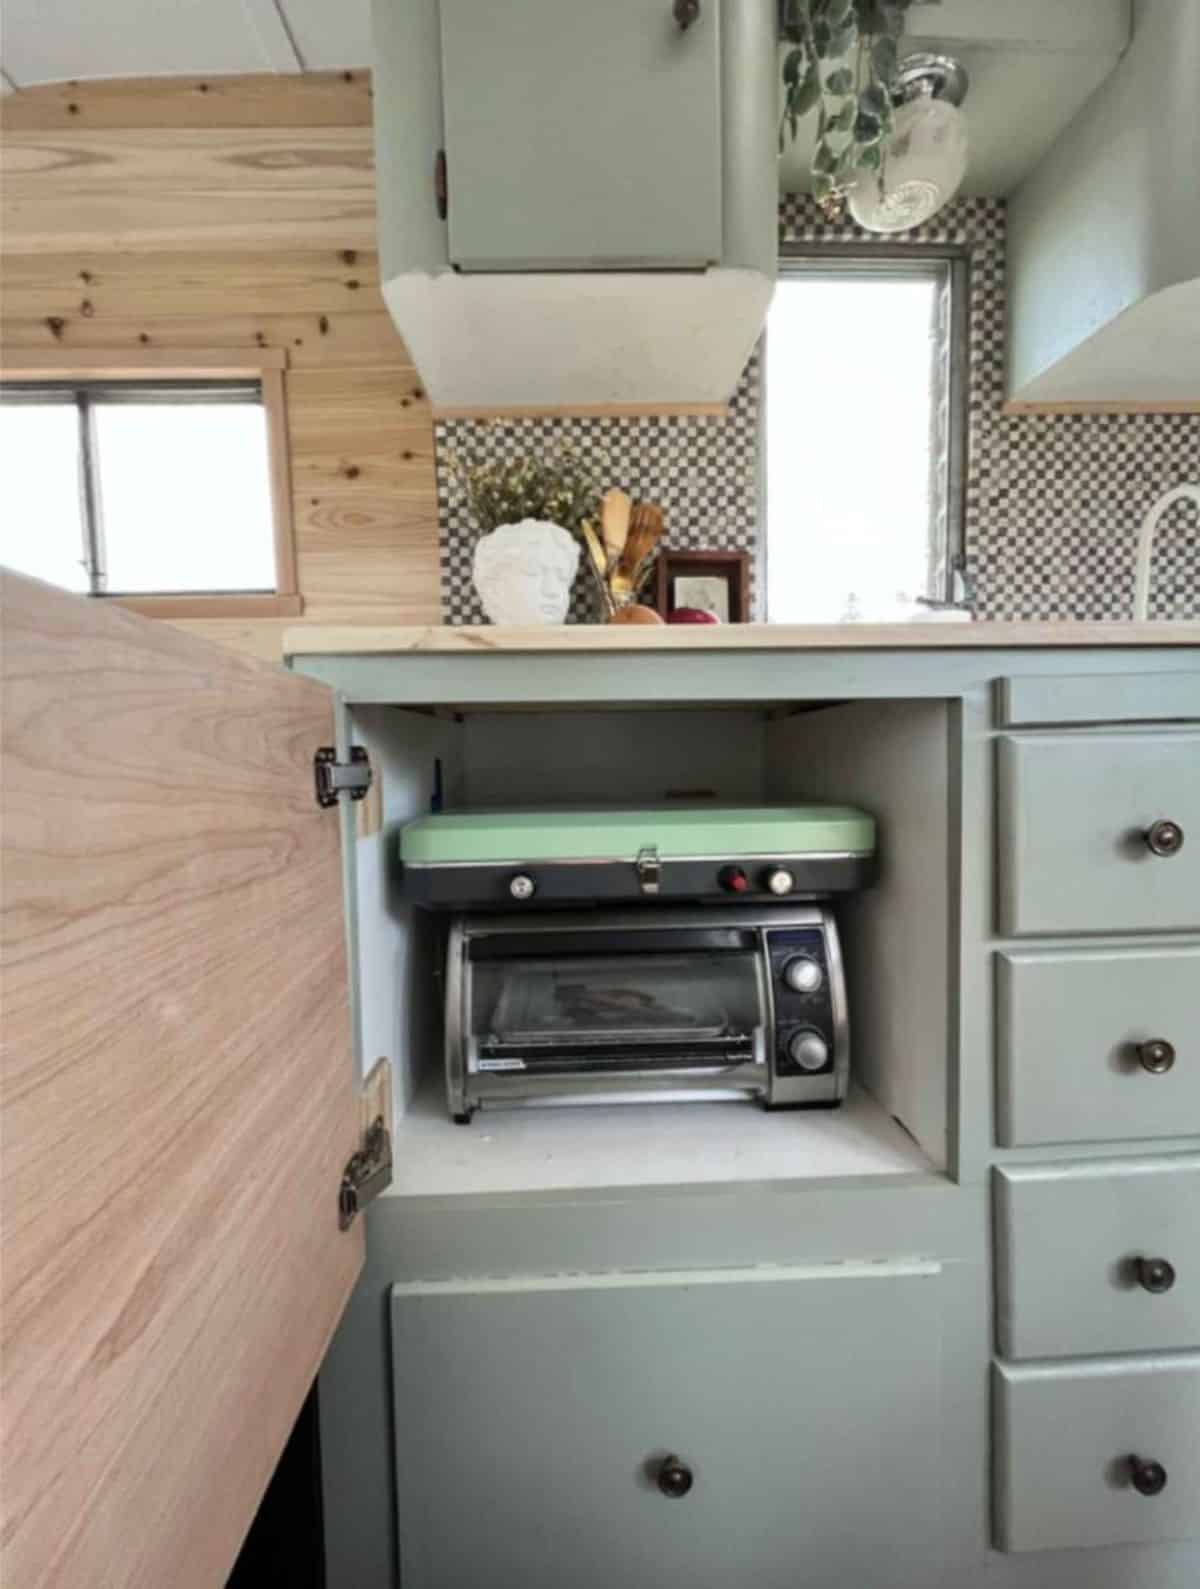 Microwave oven included in the kitchen of renovated tiny home